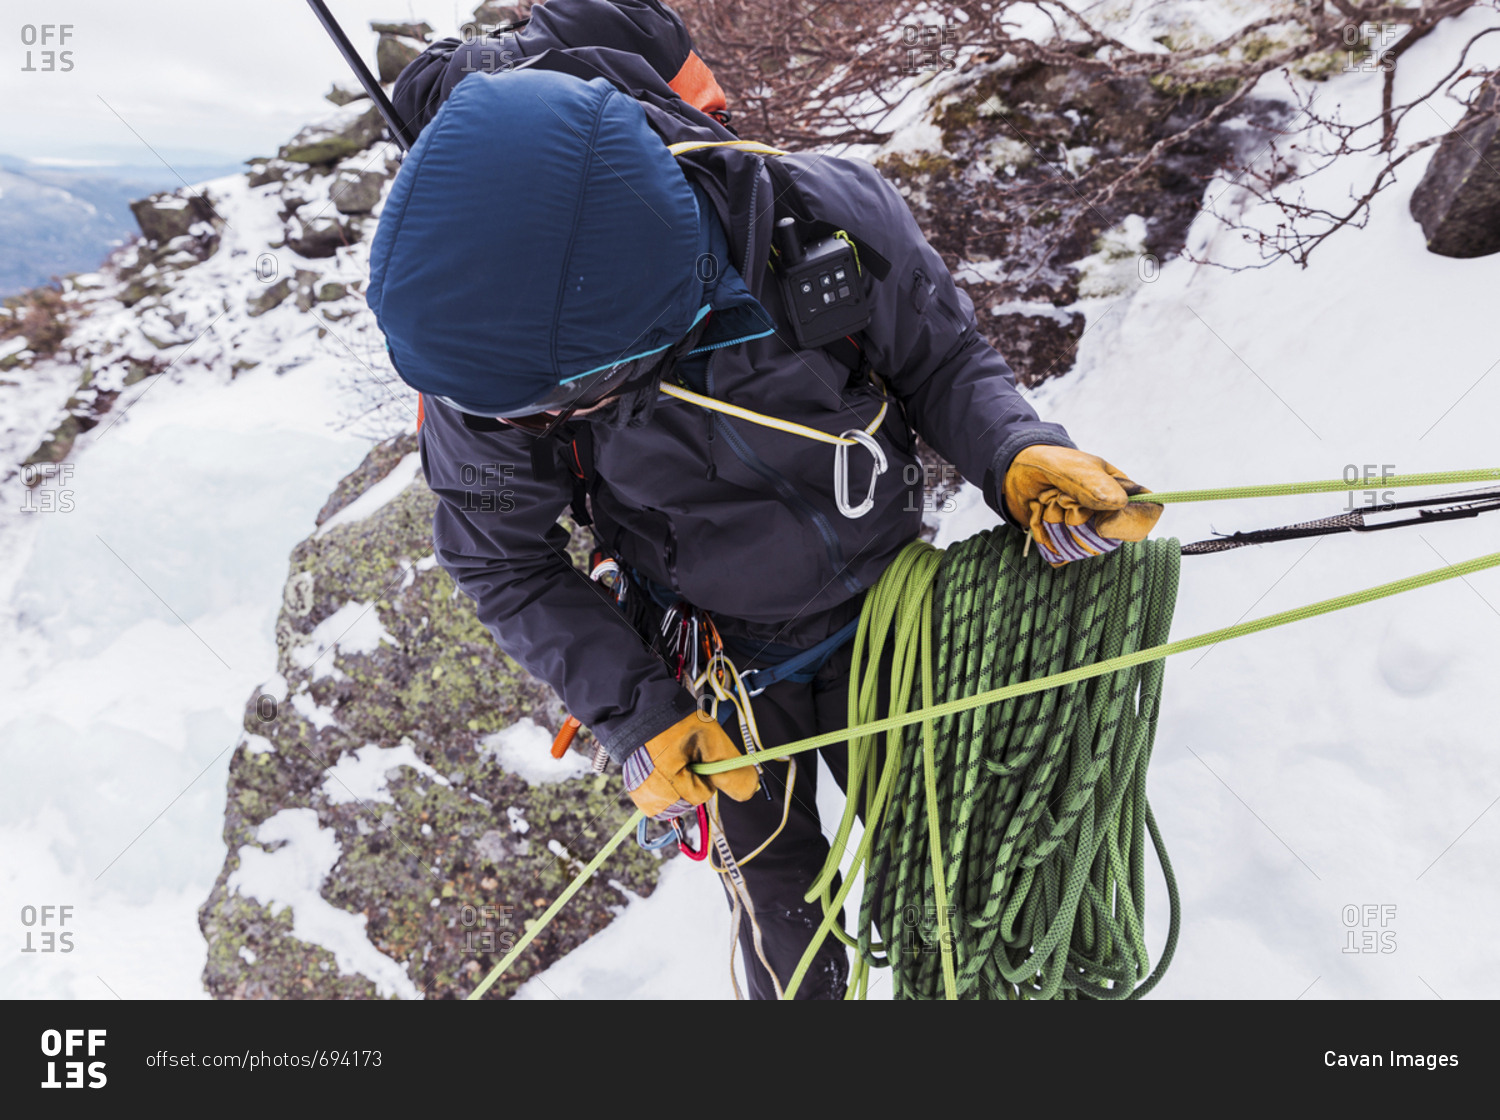 Hiker using ropes while ice climbing at White Mountains during winter